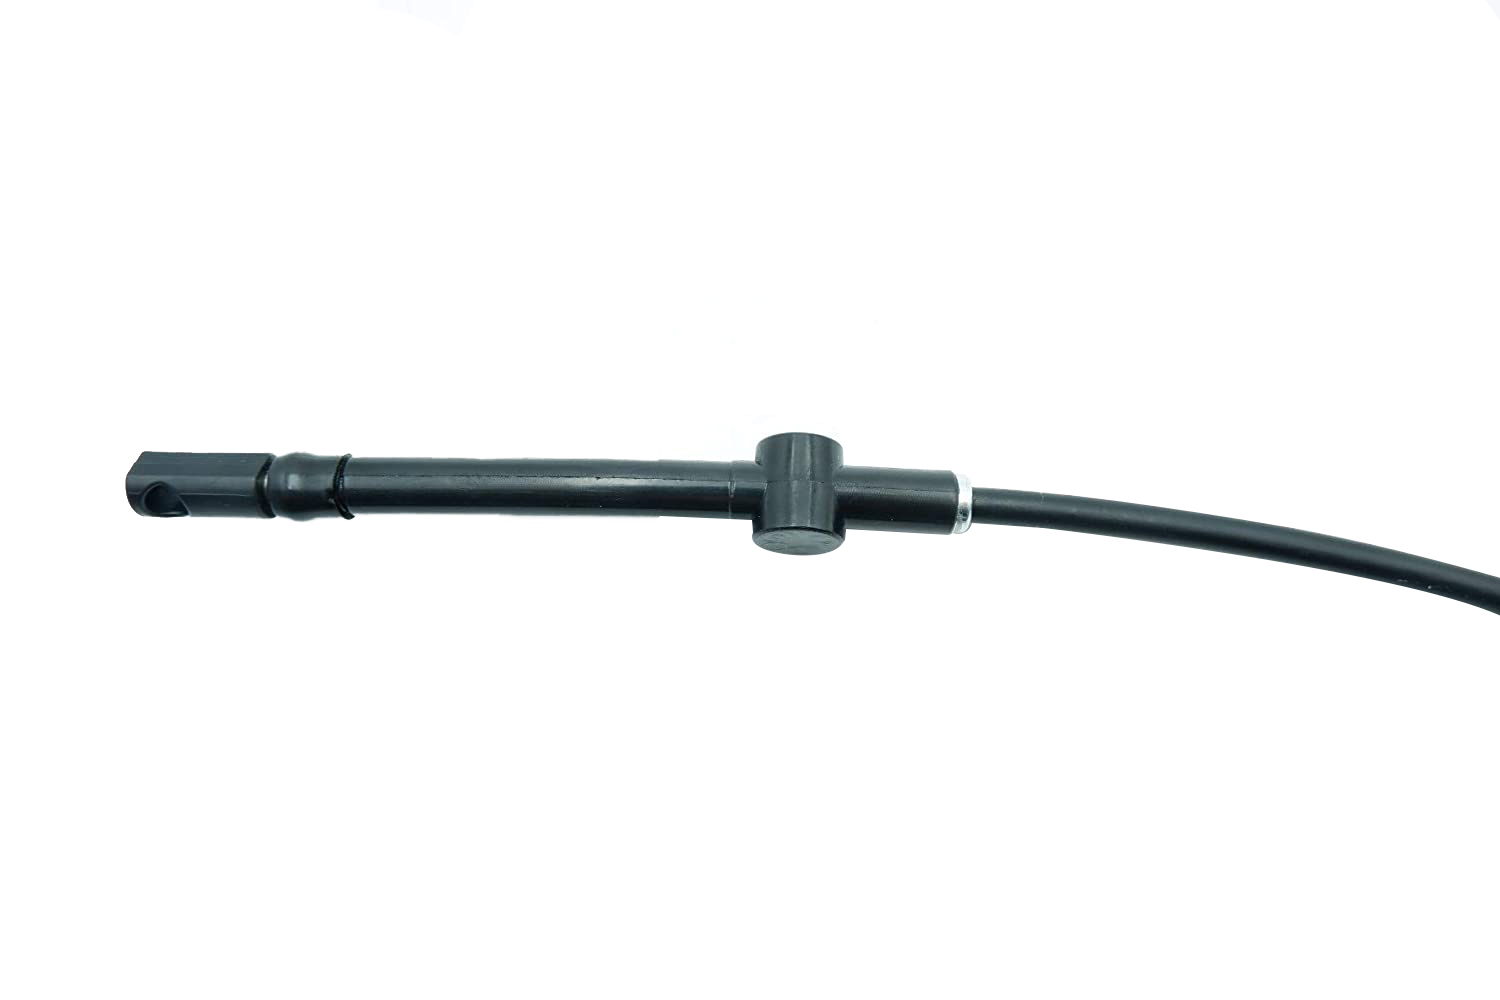 OMC Outboard Tiller Handle Cable # 0434877 / 5007771